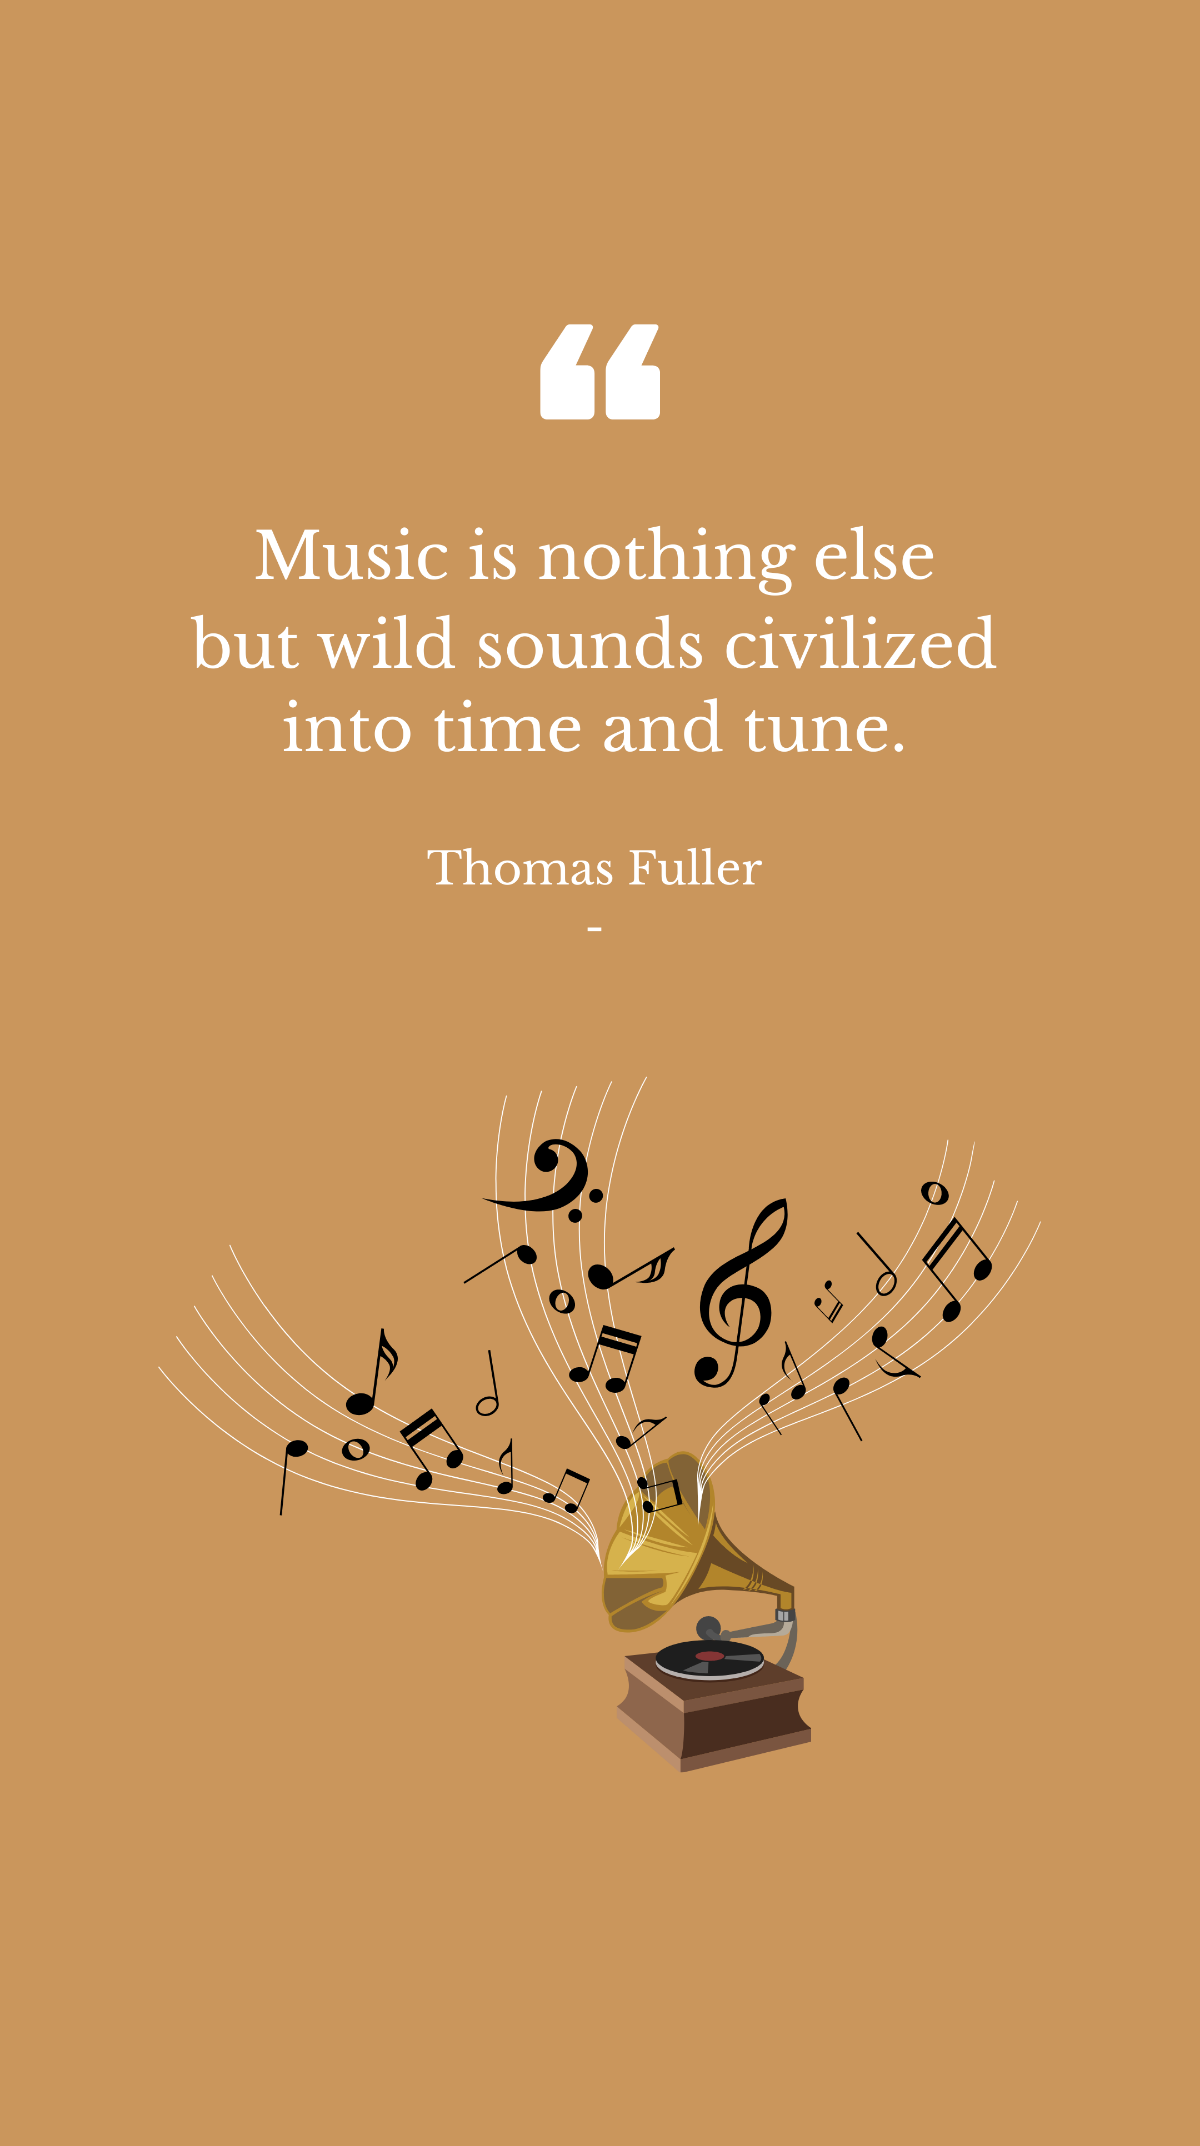 Thomas Fuller - Music is nothing else but wild sounds civilized into time and tune. Template